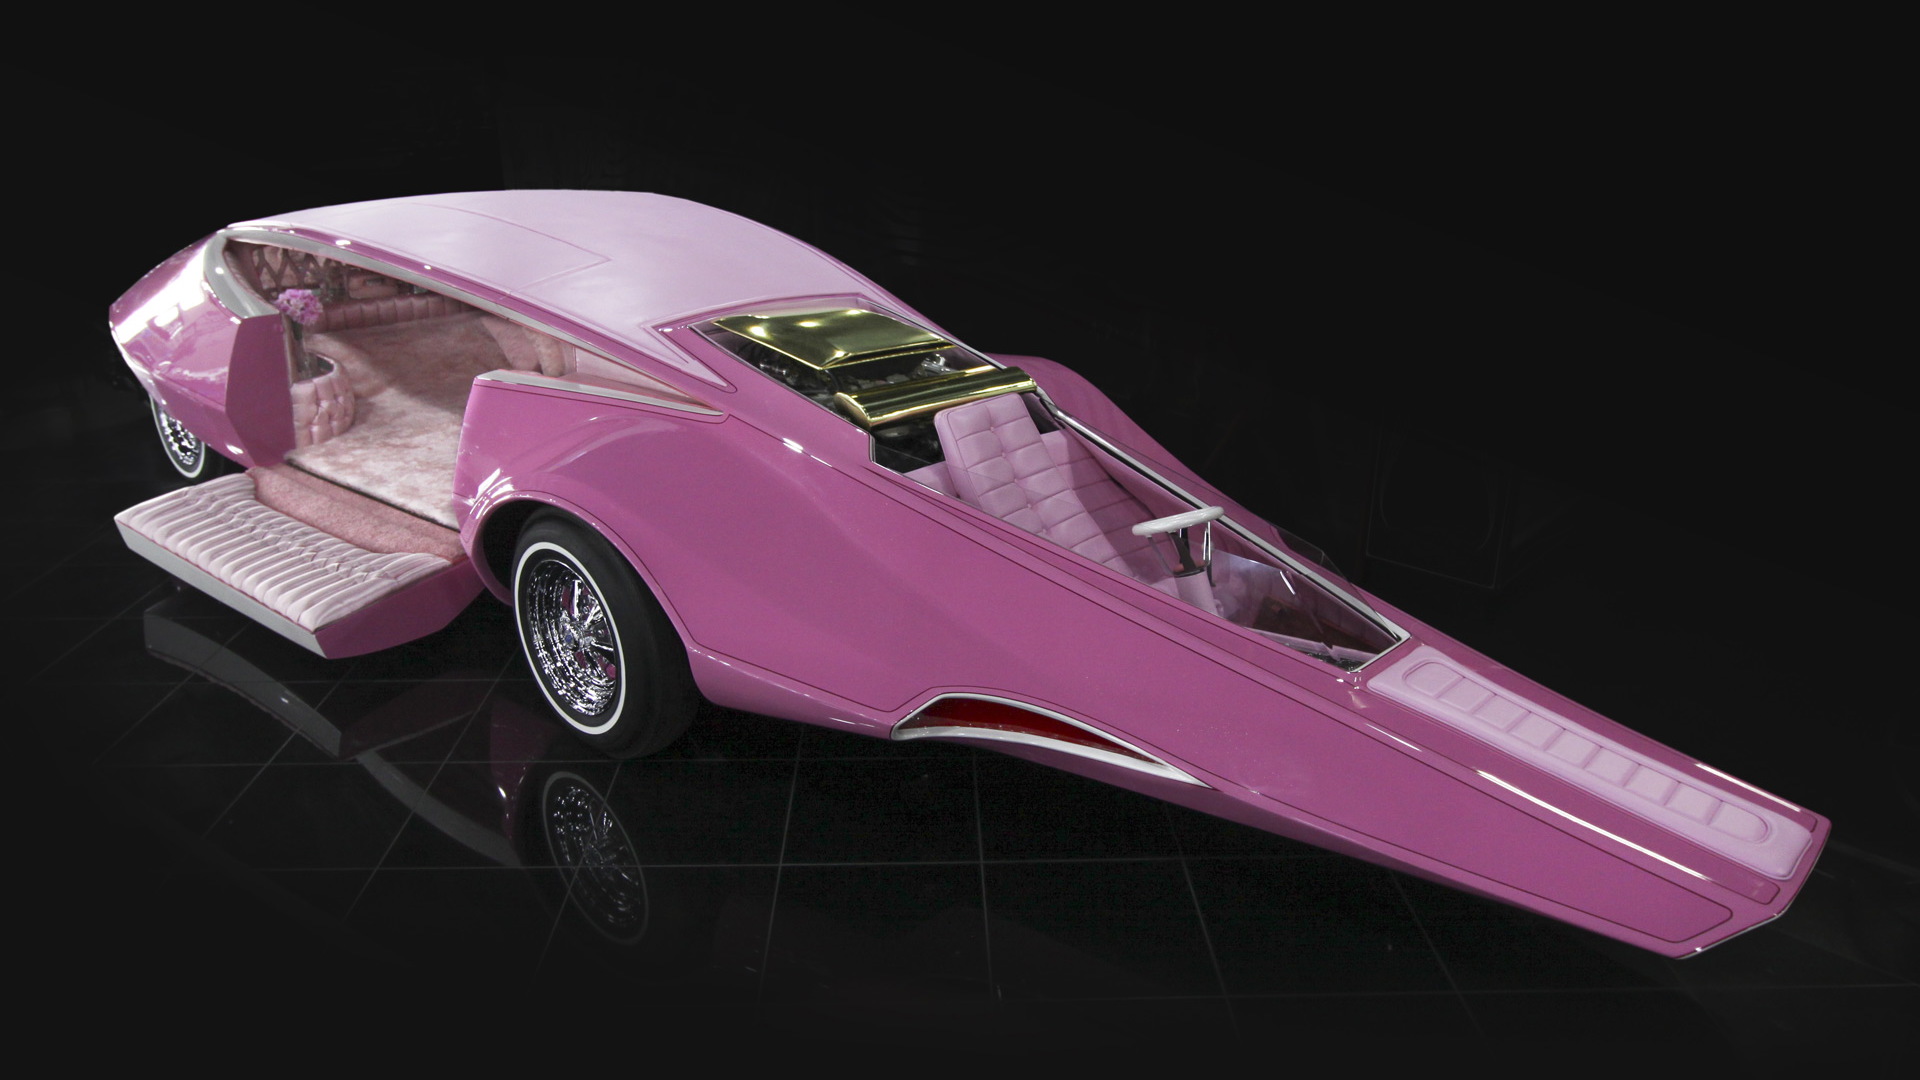 Panthermobile built for ‘Pink Panther Show’ restored by Galpin Restorations